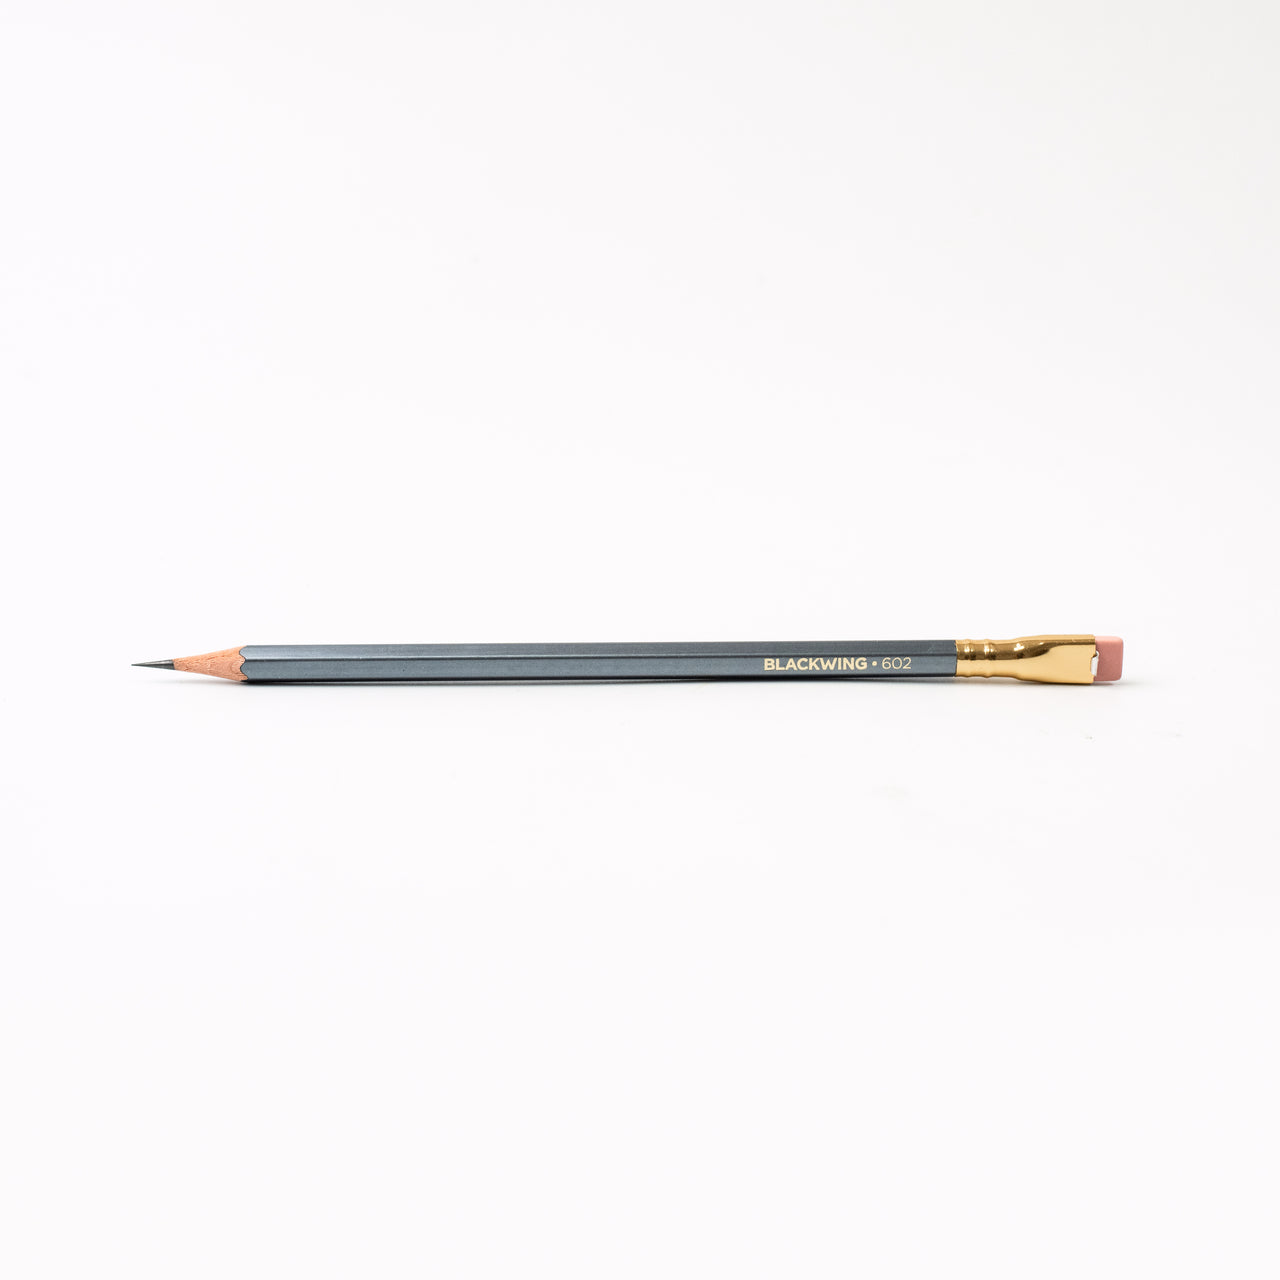 Blackwing 602 Firm Pencil- single pencil sharpened